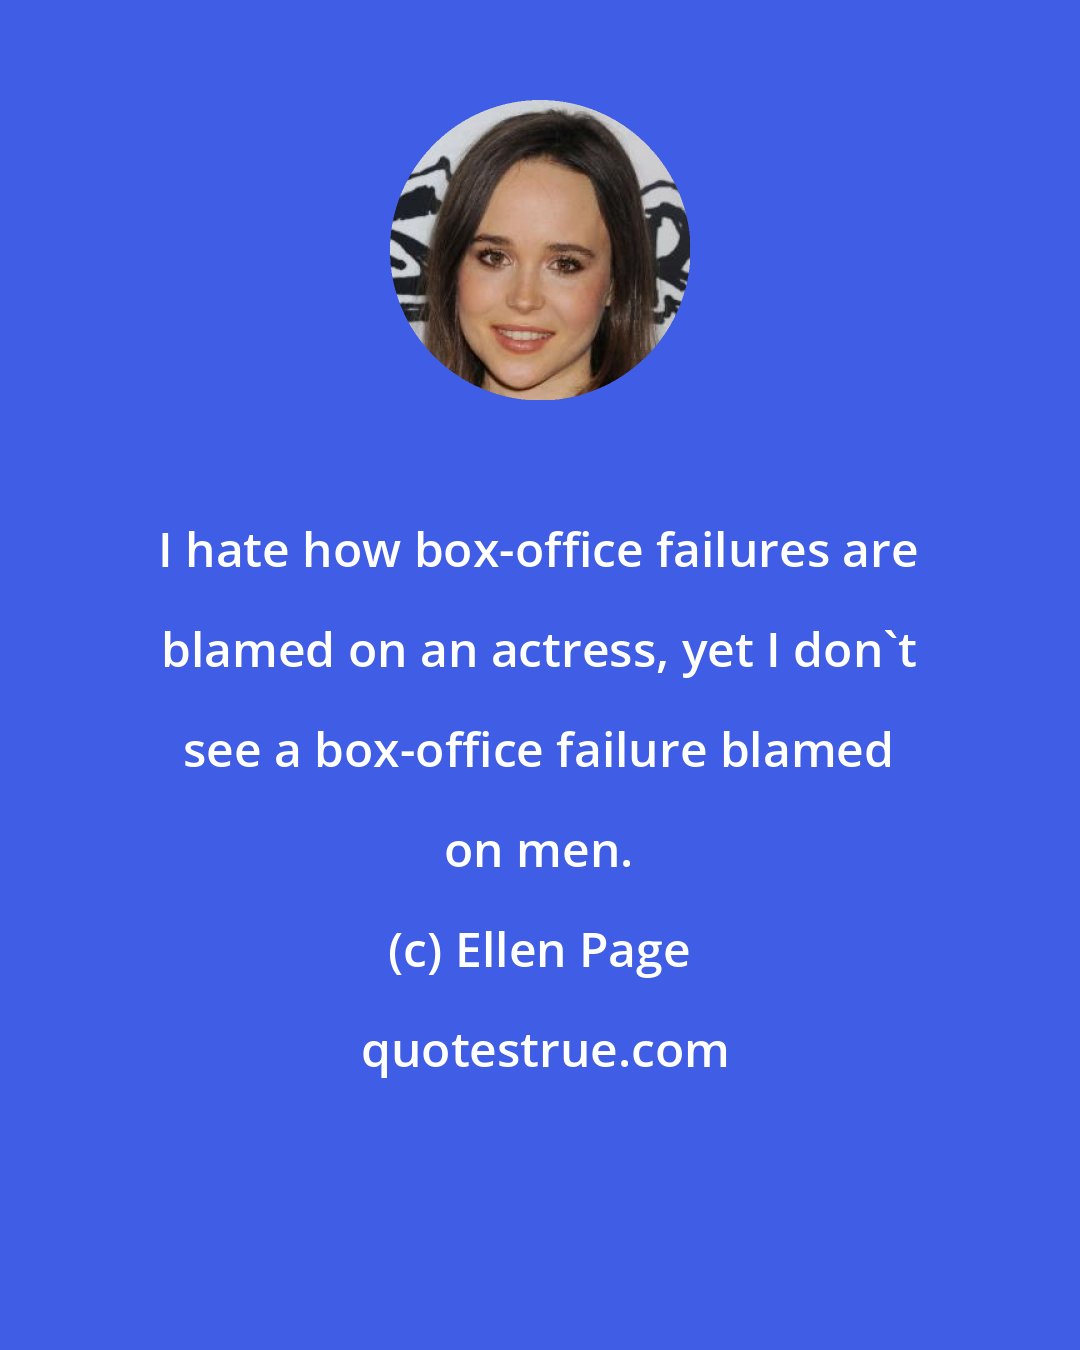 Ellen Page: I hate how box-office failures are blamed on an actress, yet I don't see a box-office failure blamed on men.